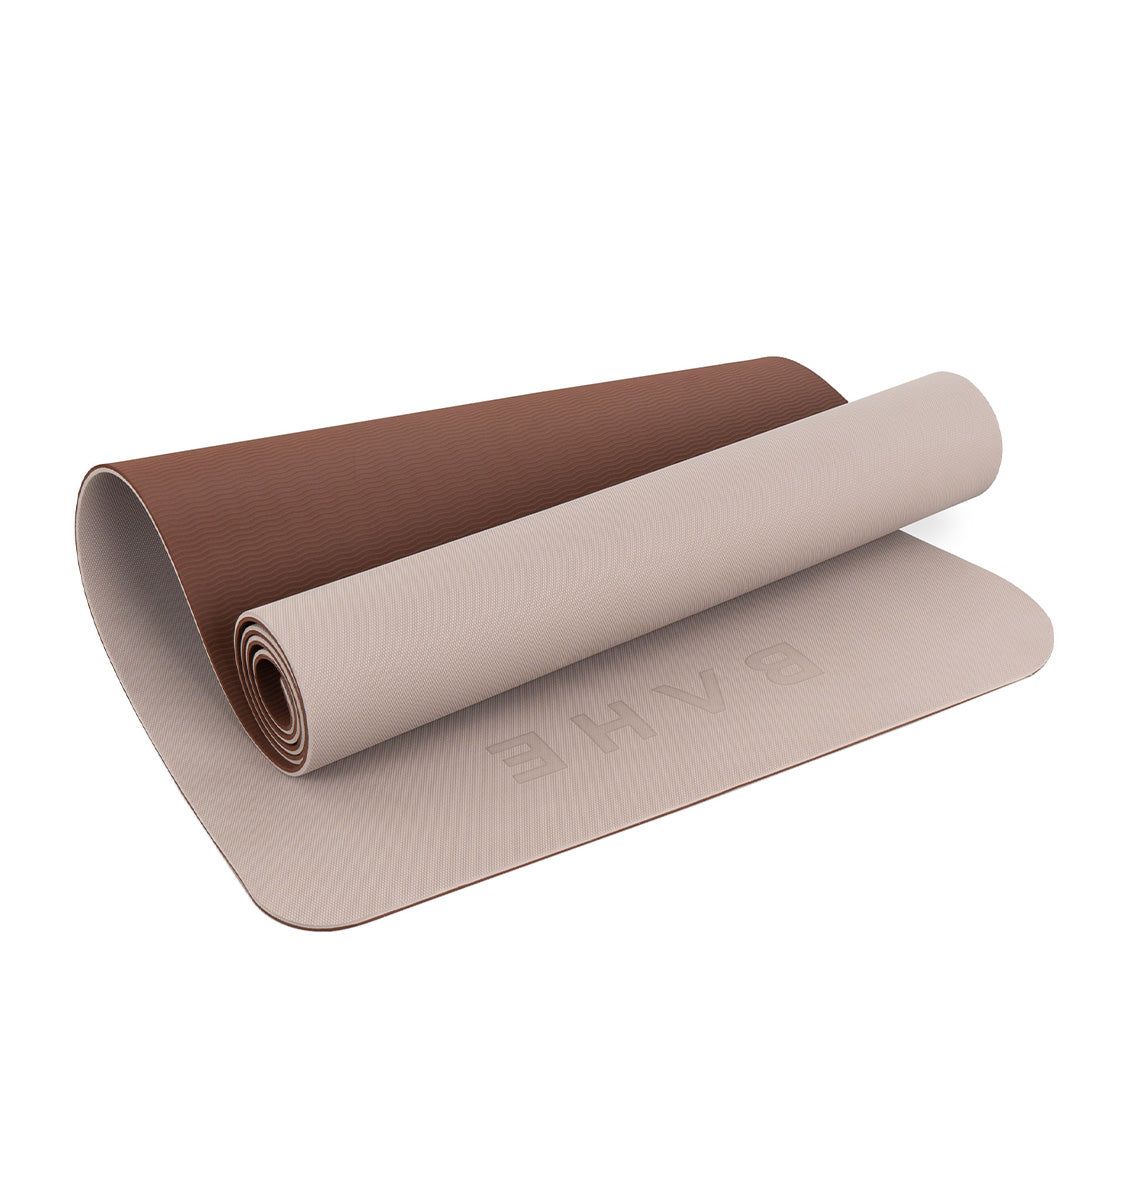 BAHE Soft Touch Reversible XL Yoga Mat - 6mm - Clay - 2